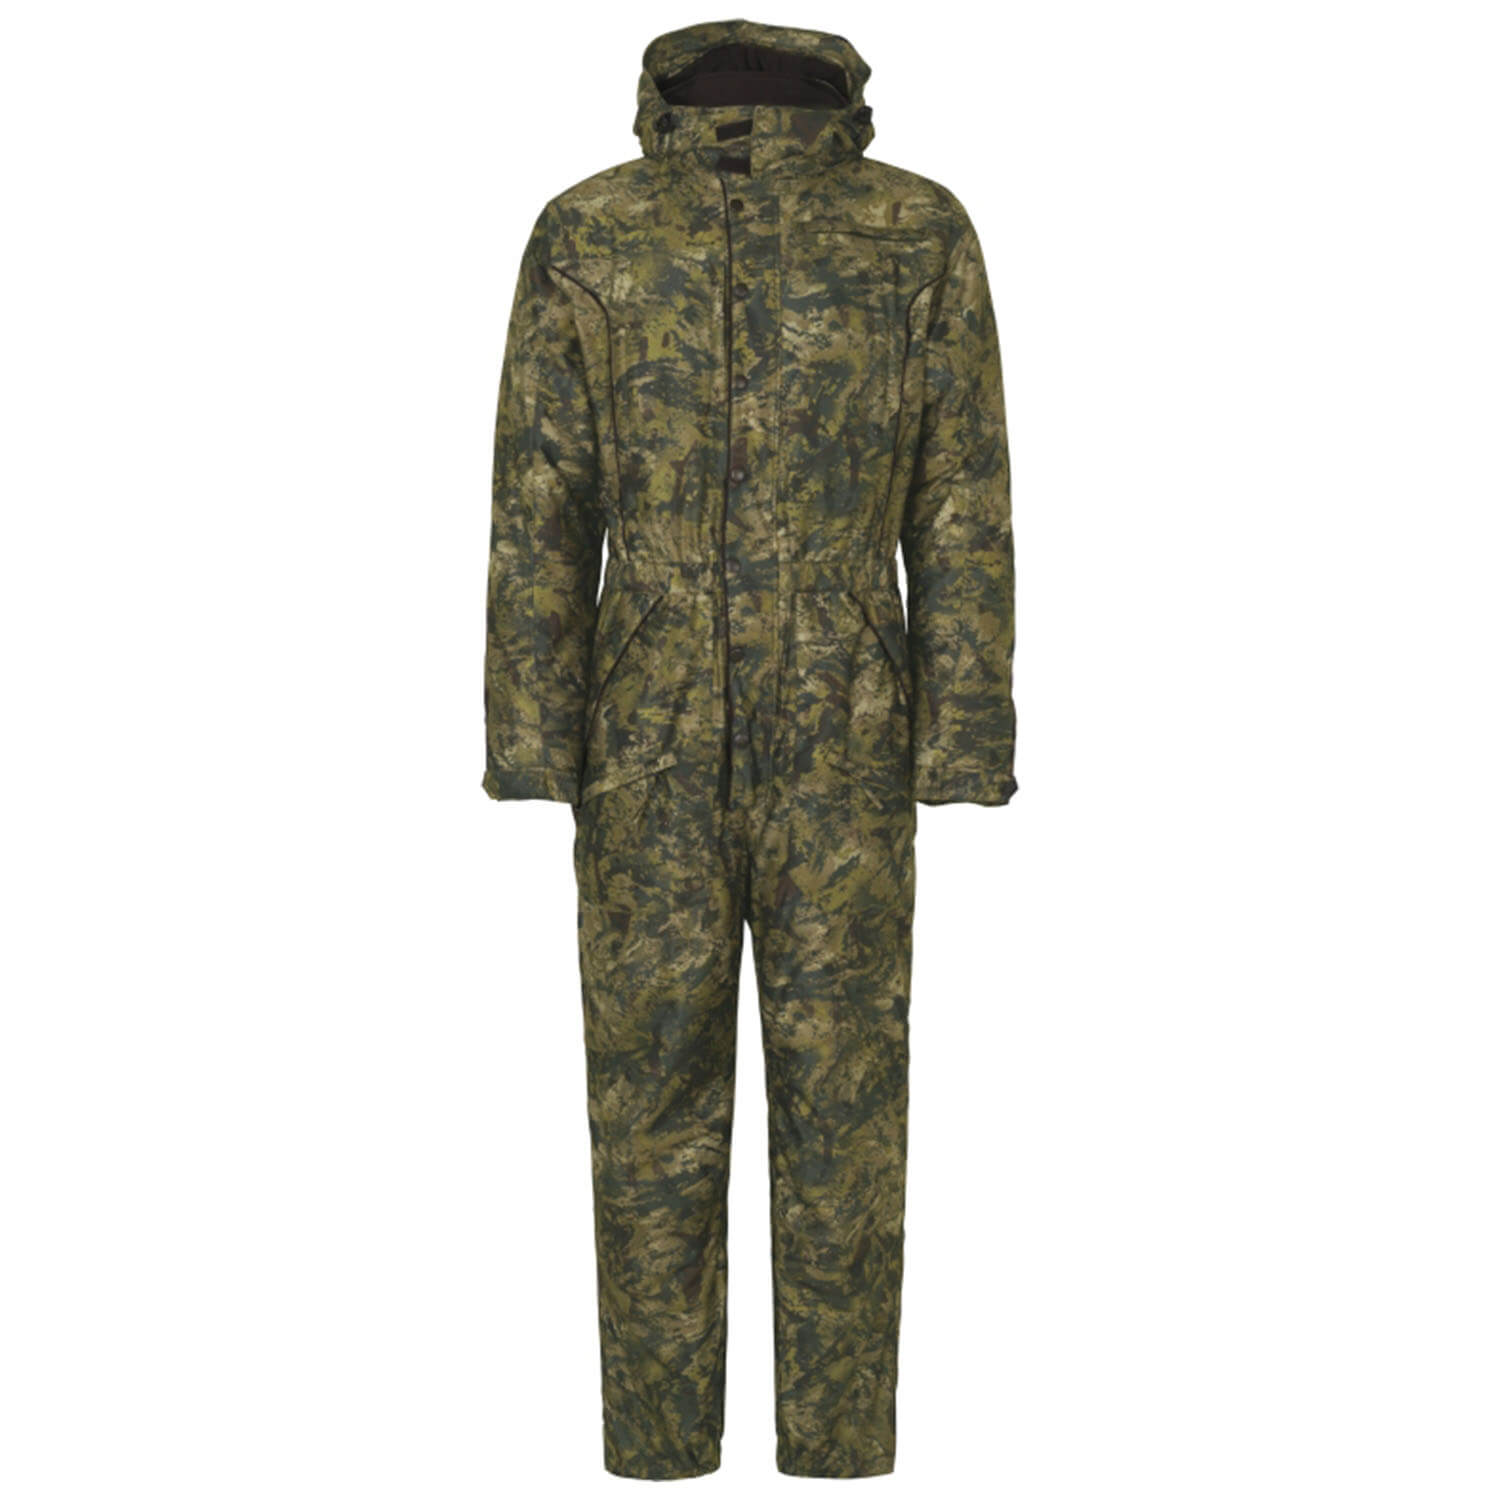 Seeland Overall Outthere (invis green) - Camouflage Jackets